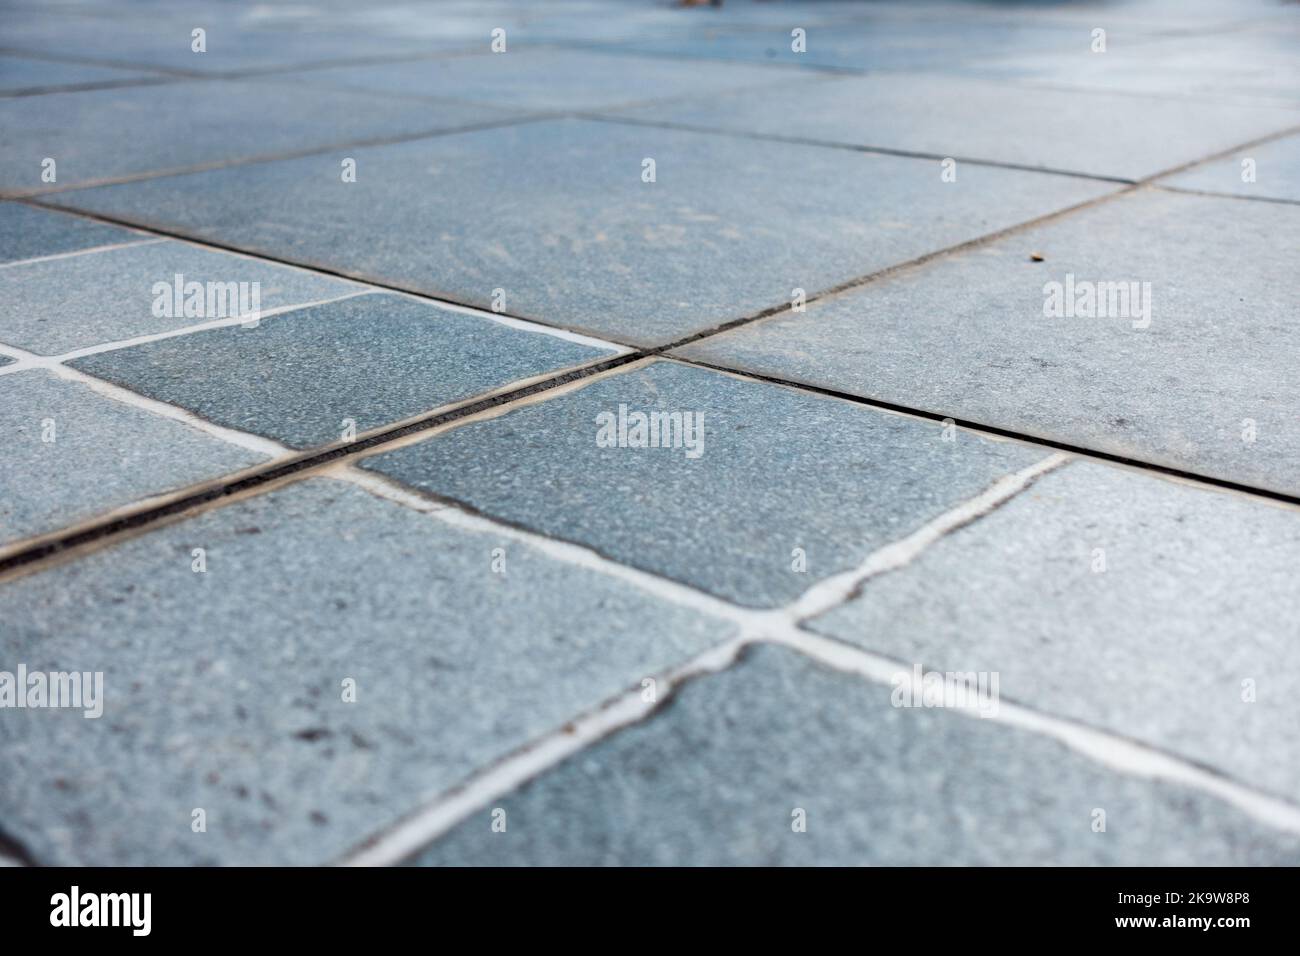 Outdoor rooftop tiles attached in symmetry with each other at right angle. India Stock Photo